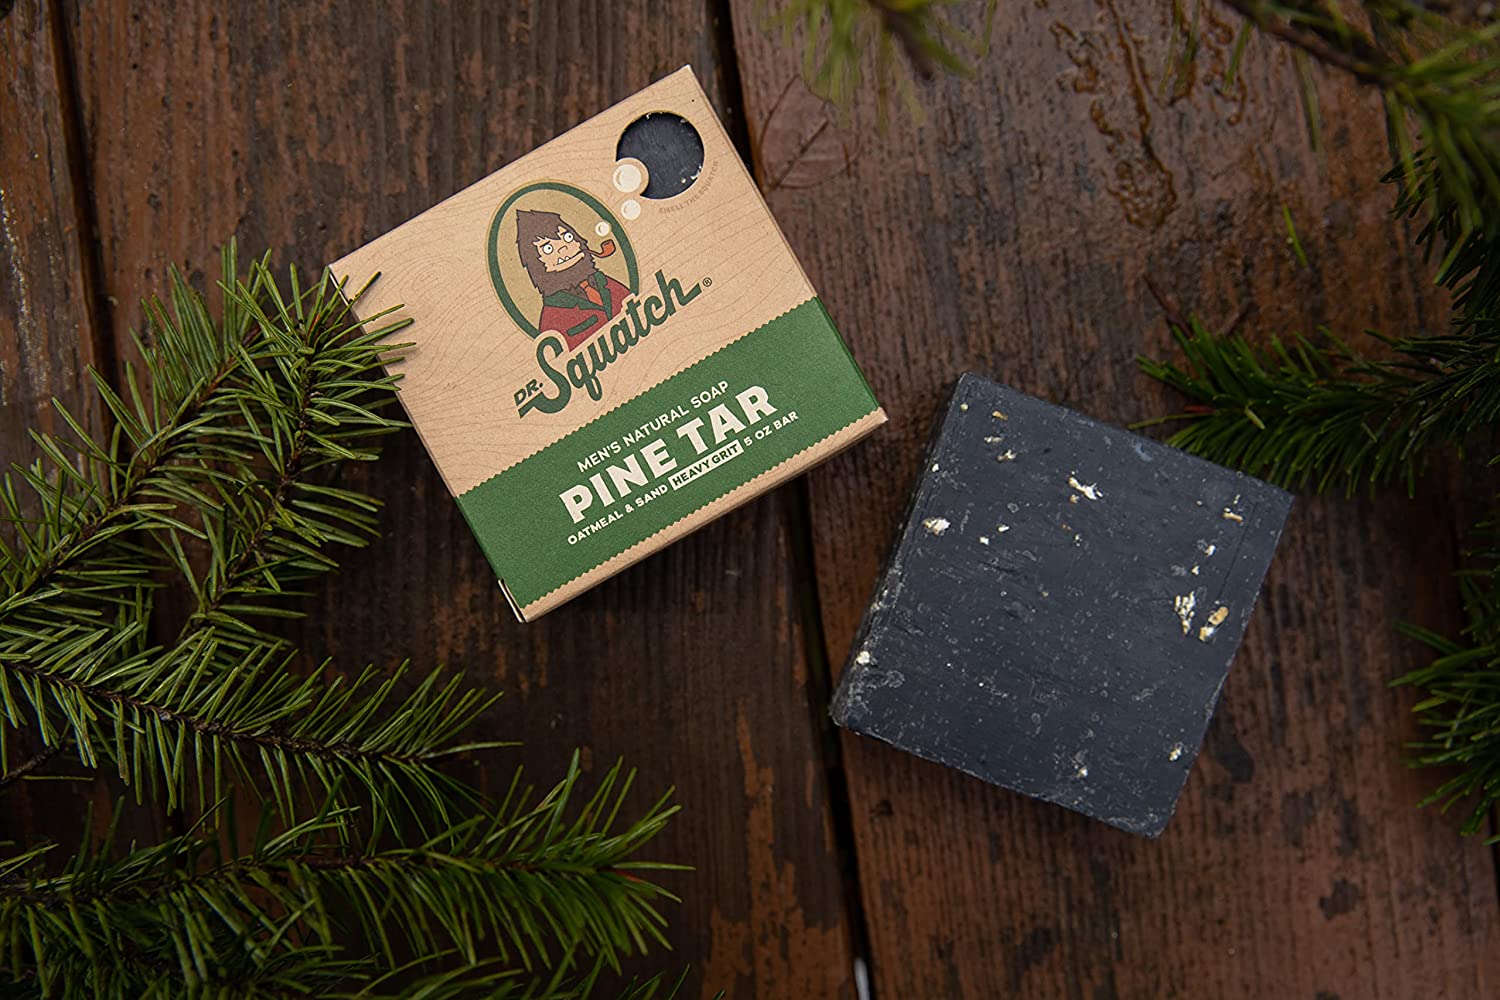 Dr. Squatch Pine Tar Bar Soap - Grooming Lounge